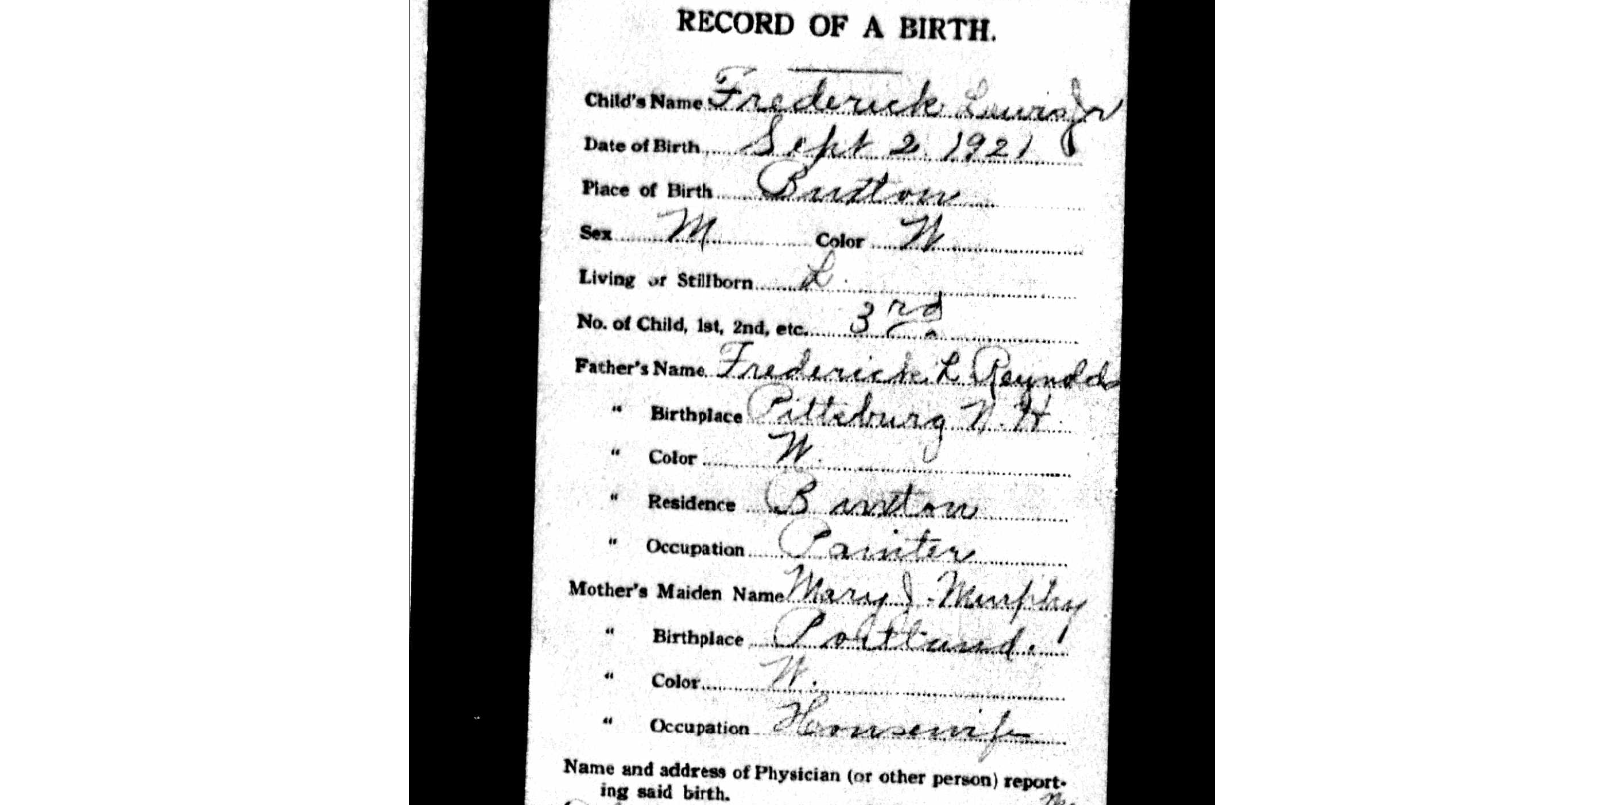 frederick-birth record sept 2 1921 buxton.png